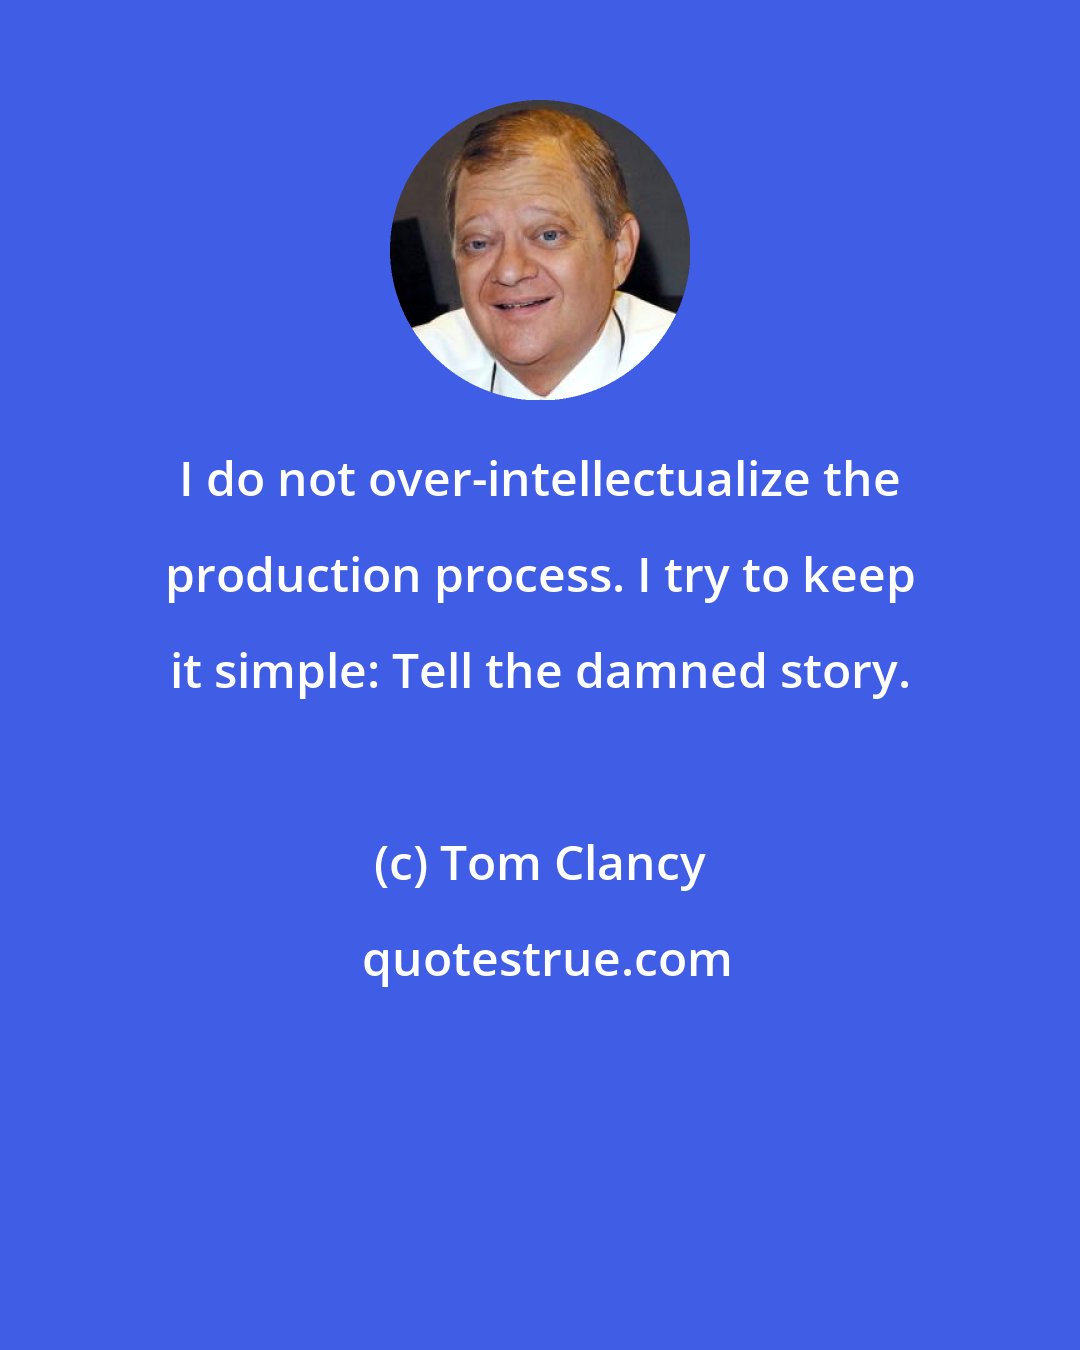 Tom Clancy: I do not over-intellectualize the production process. I try to keep it simple: Tell the damned story.